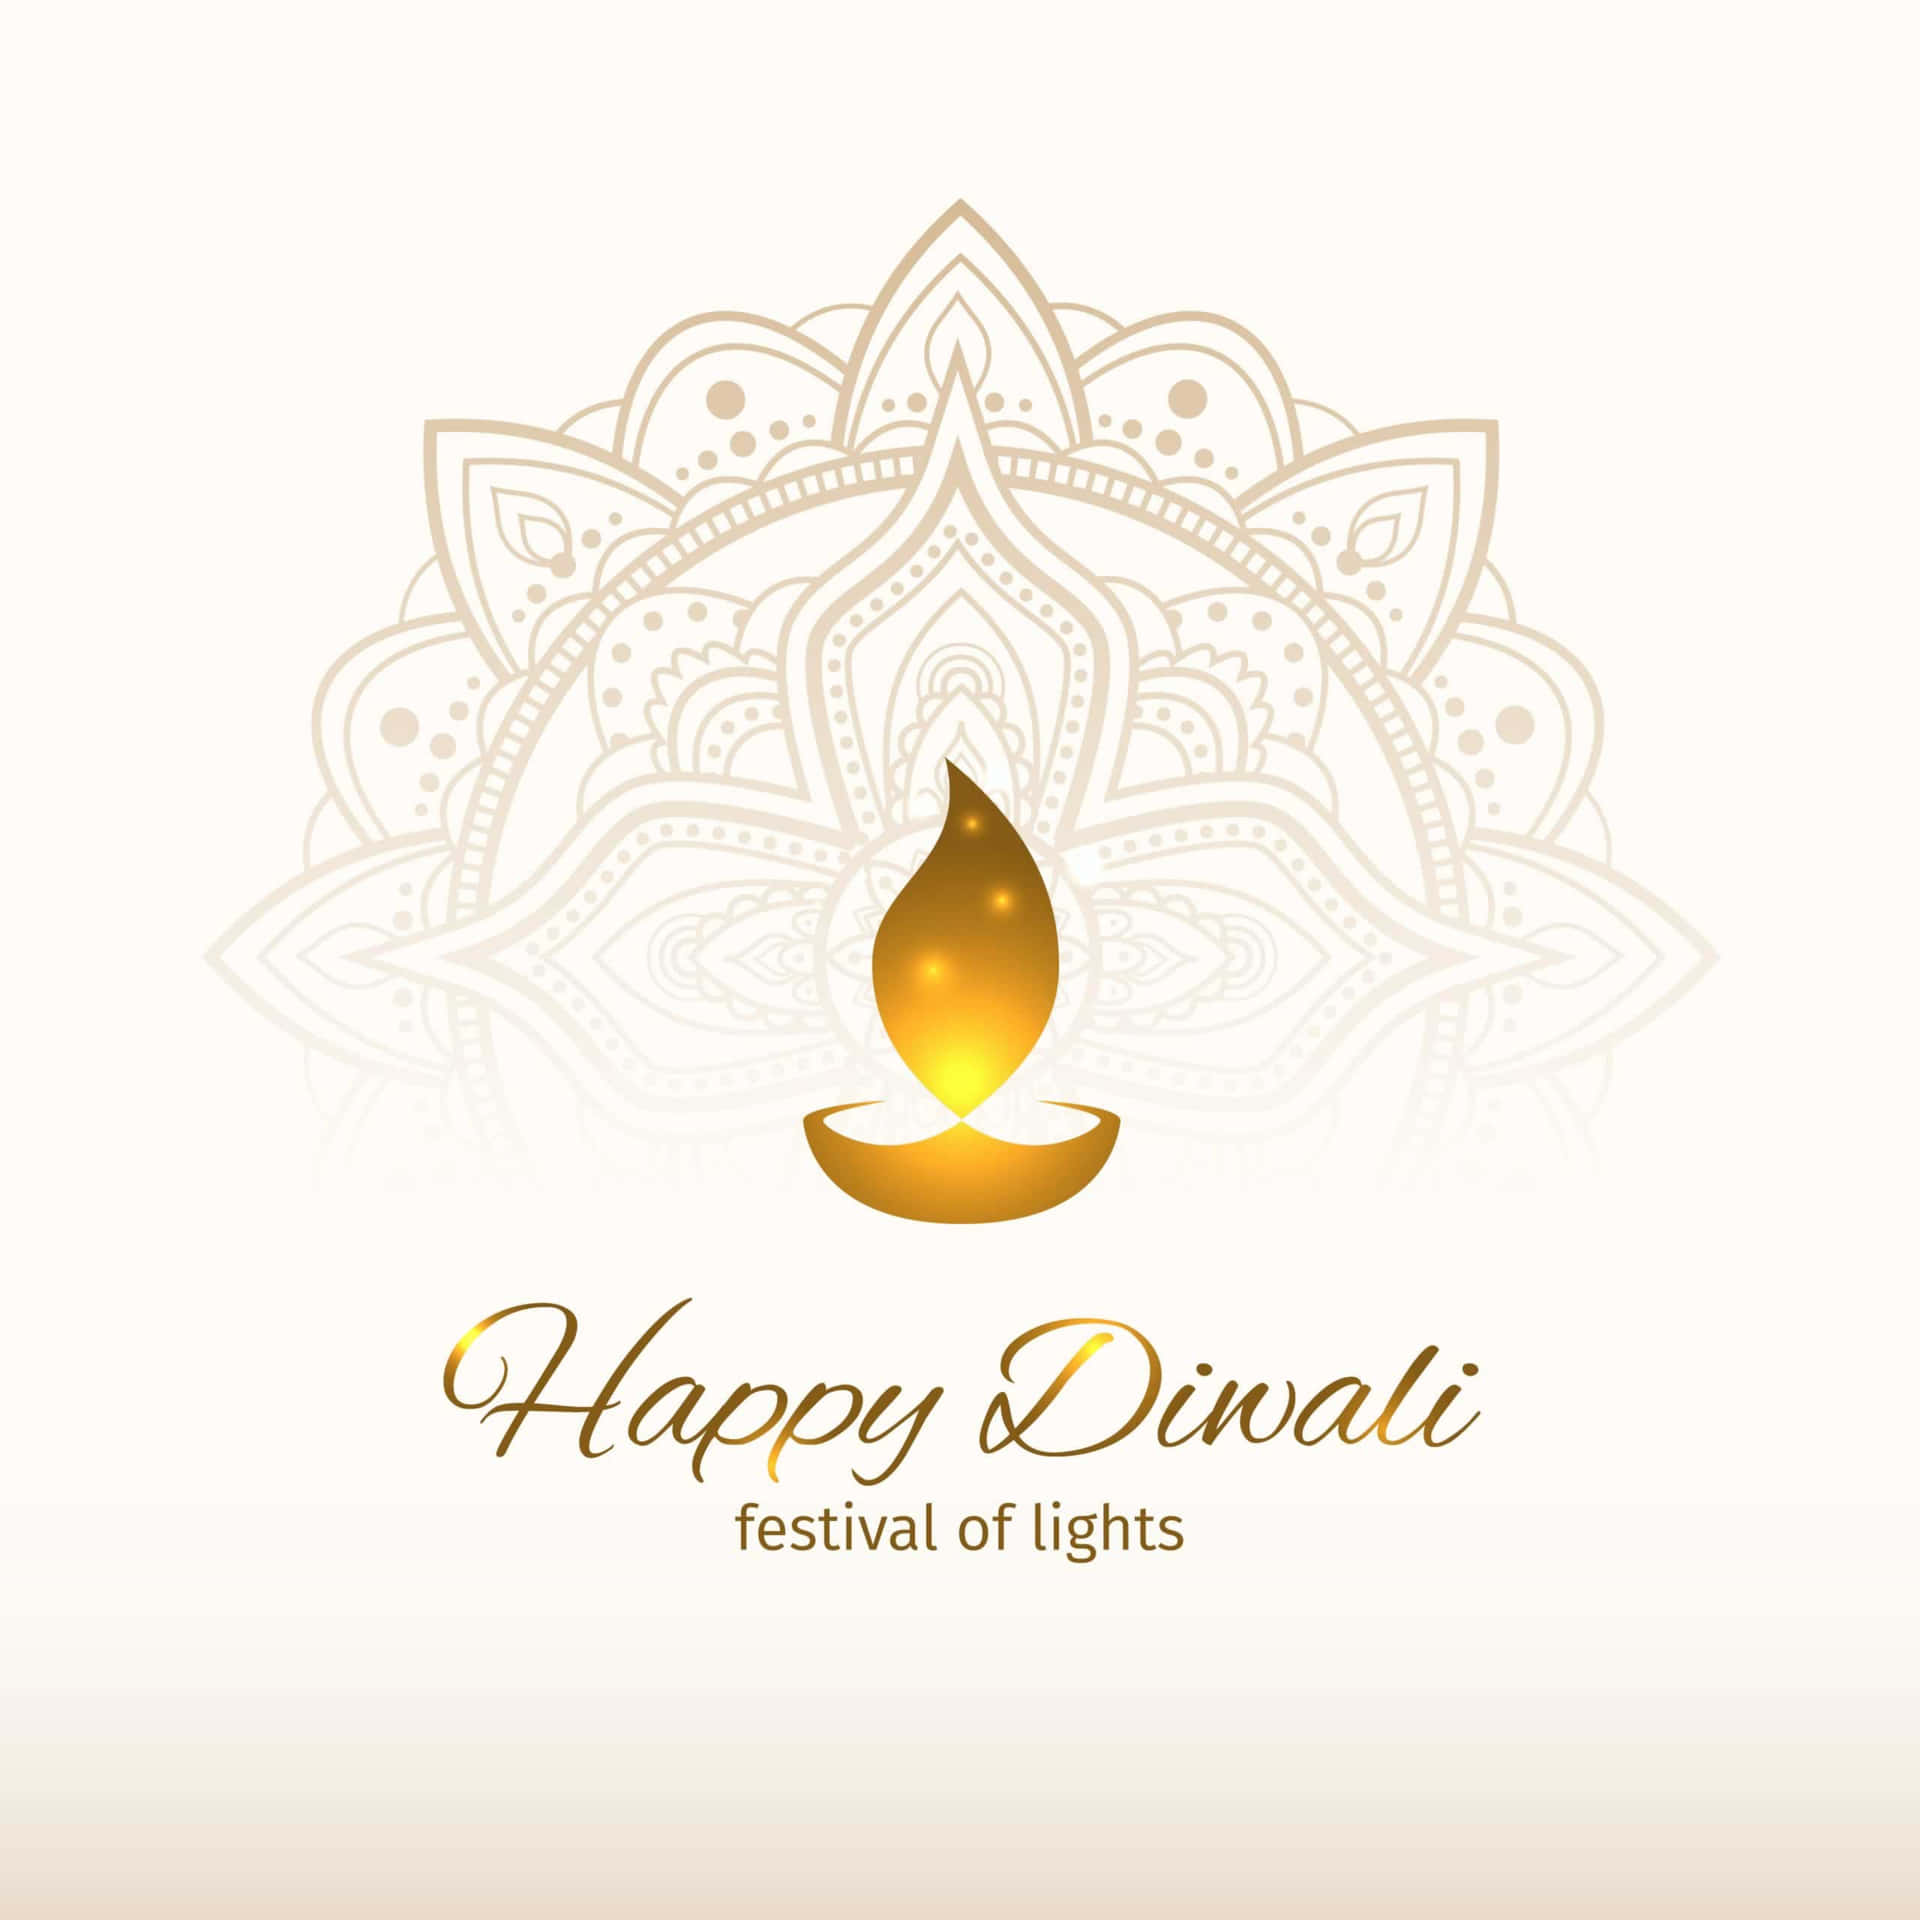 Happy Diwali Festival Of Lights Background With Golden Candle